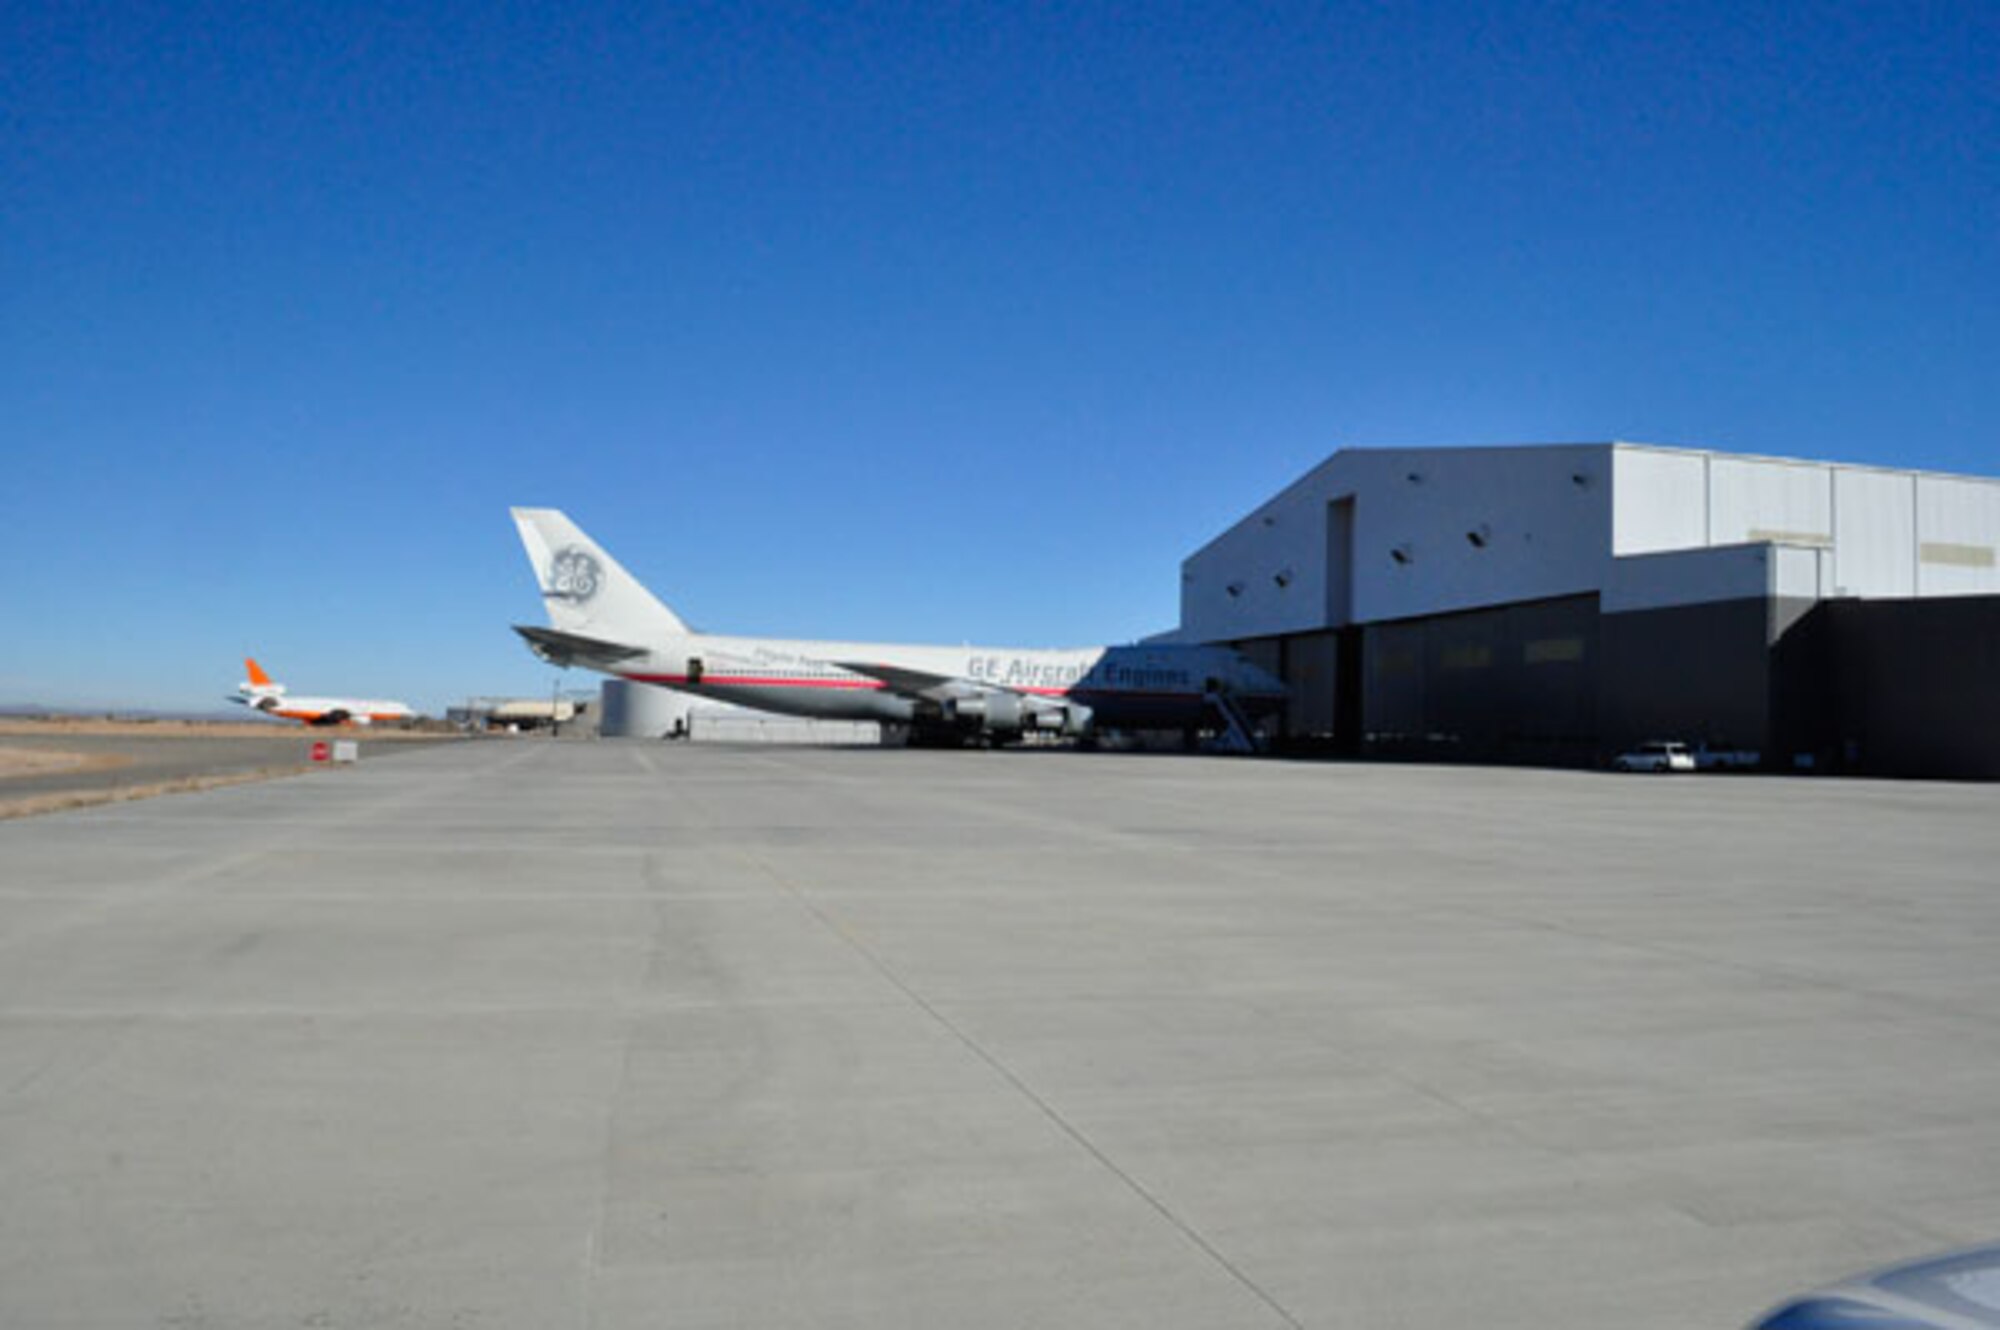 U.S. Air Force property declared surplus under Base Realignment and Closure is now in productive reuse at the former George AFB where General Electric Aviation opened shop to test aircraft engines on planes like this 747-400.